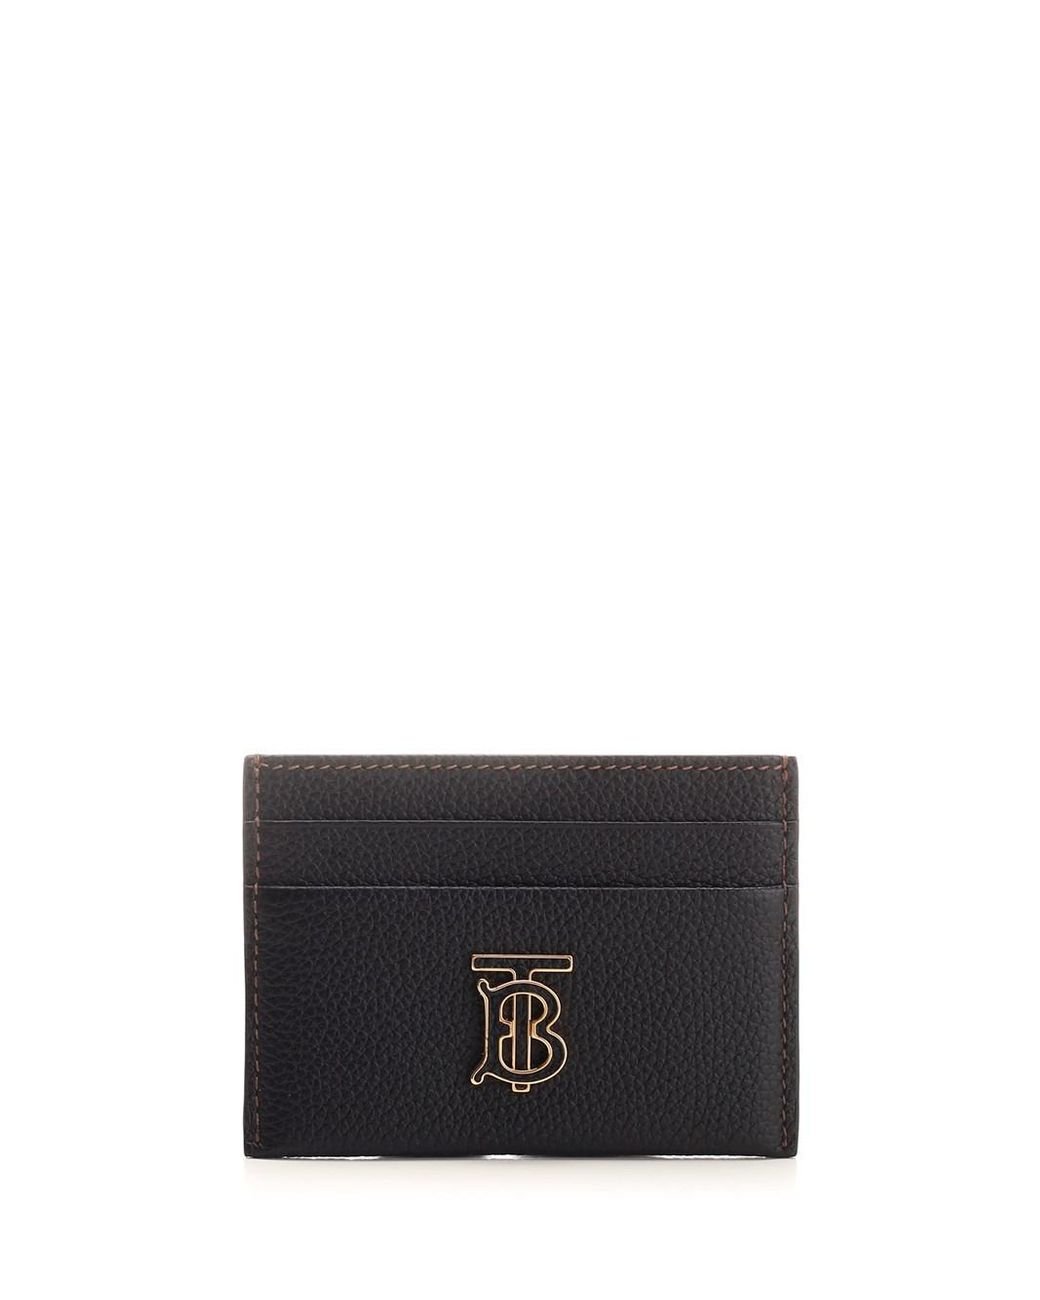 Burberry Card Holder in Black | Lyst